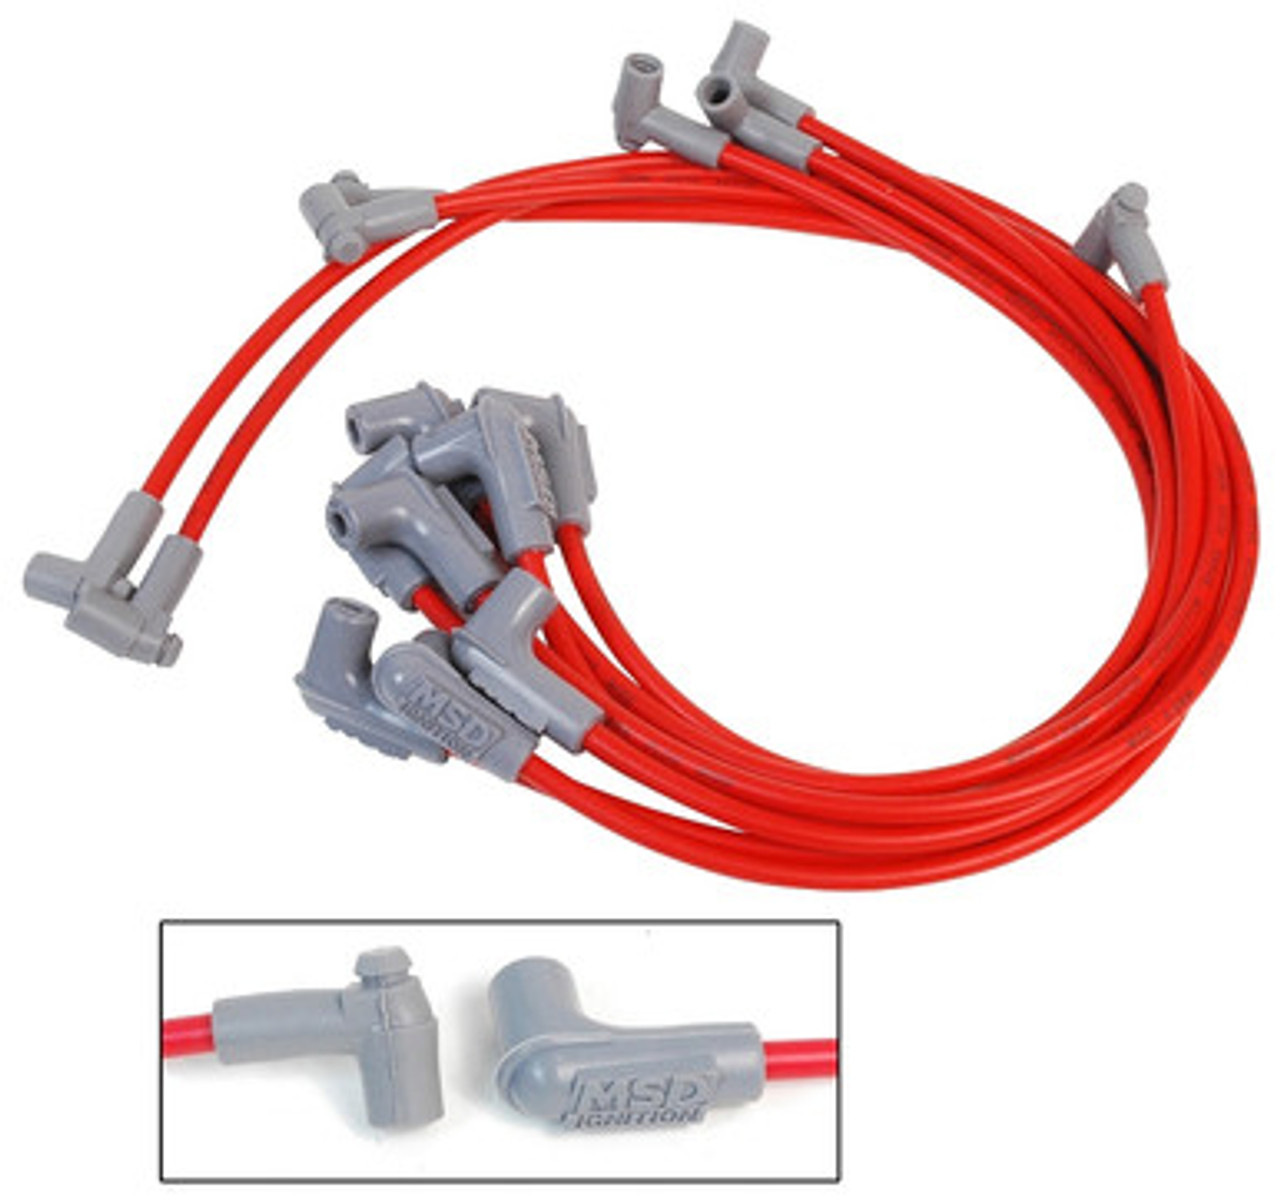 MSD Super Conductor Spark Plug Wires for HEI Cap Buick 350 V8